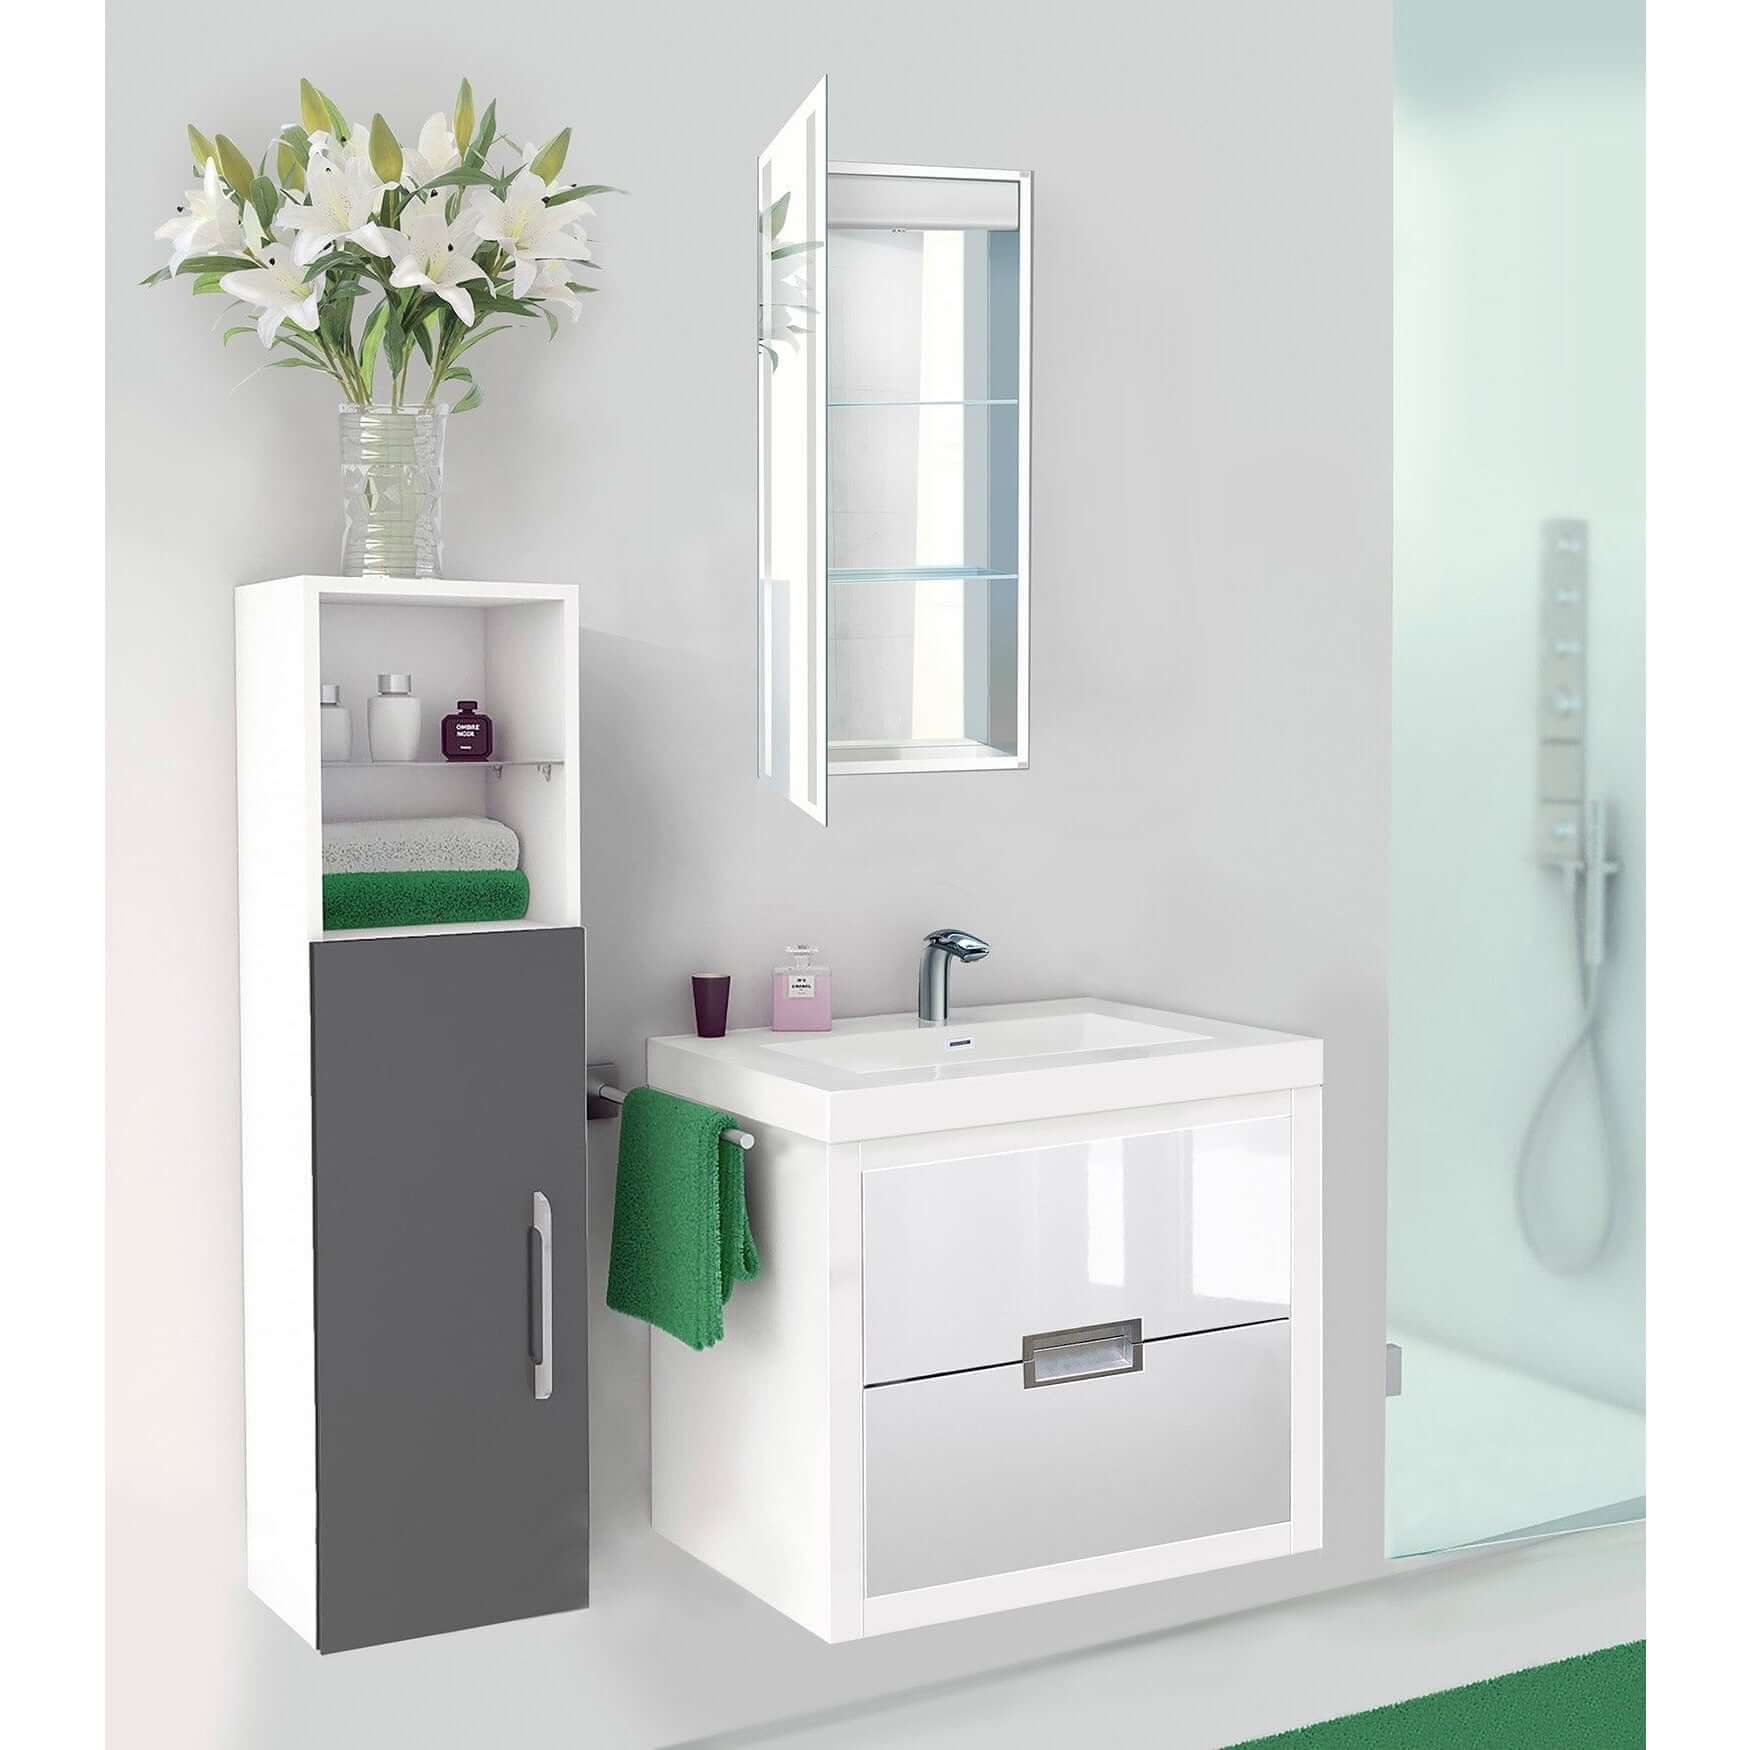 Kinetic bathroom medicine cabinet with mirror and efficient LED lighting